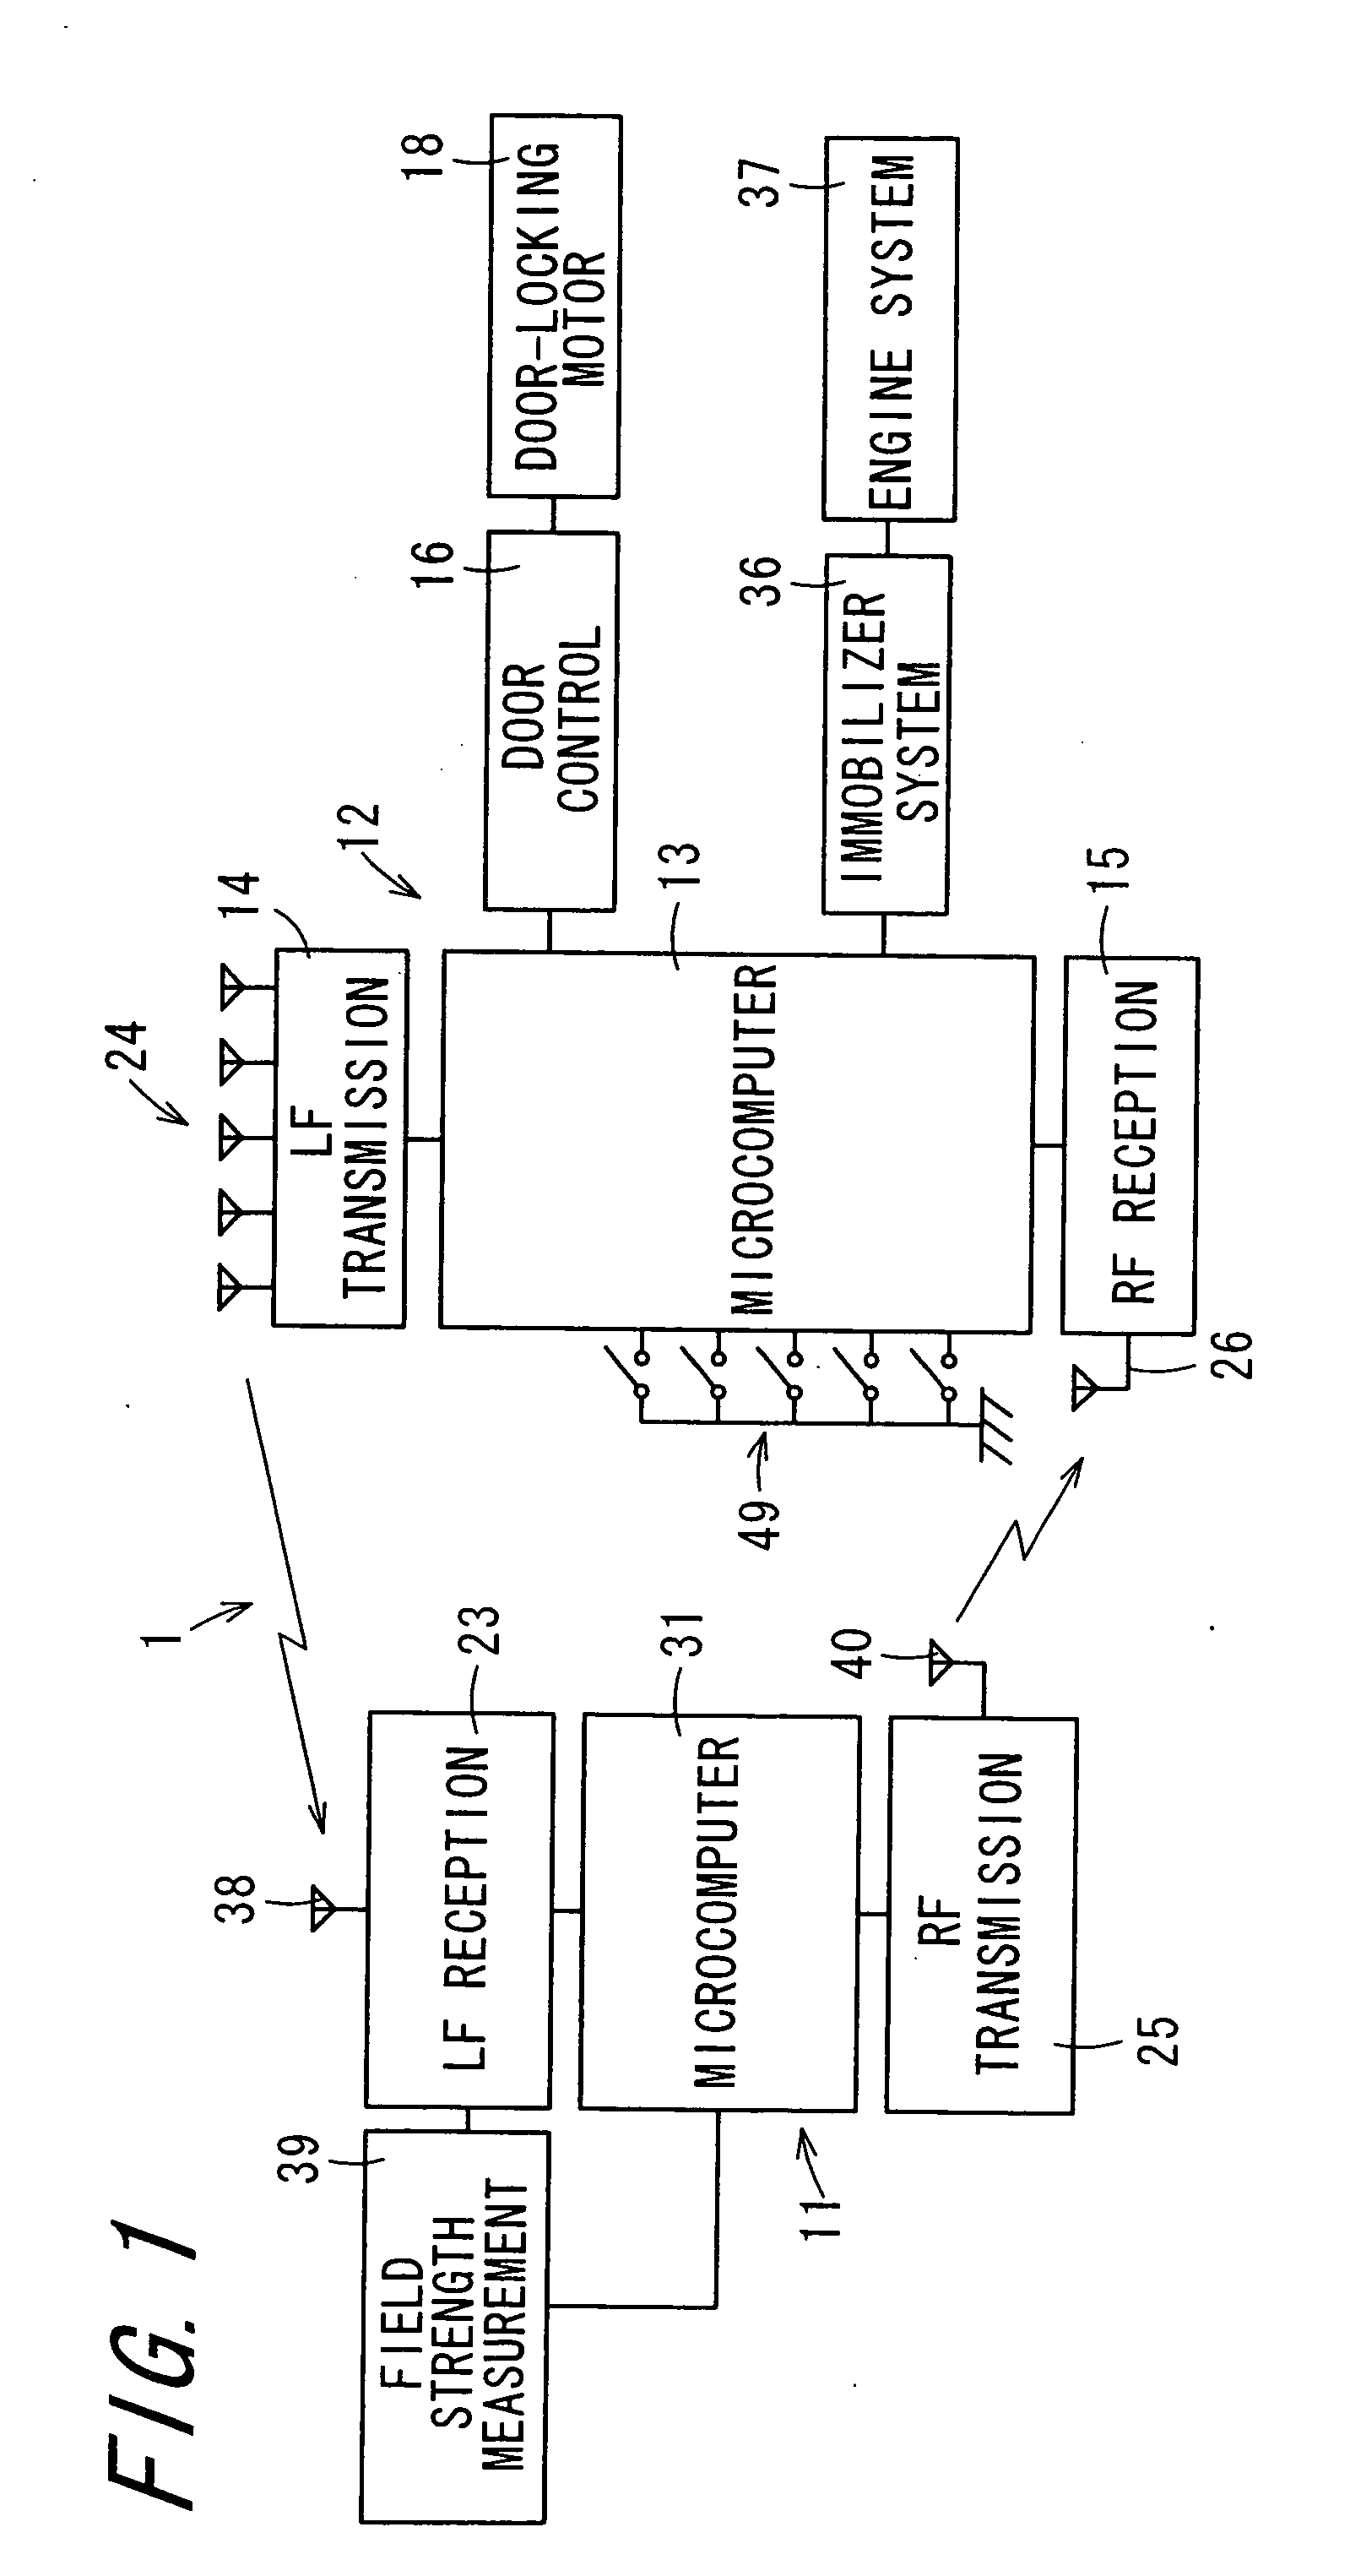 Vehicle control system and vehicle control apparatus